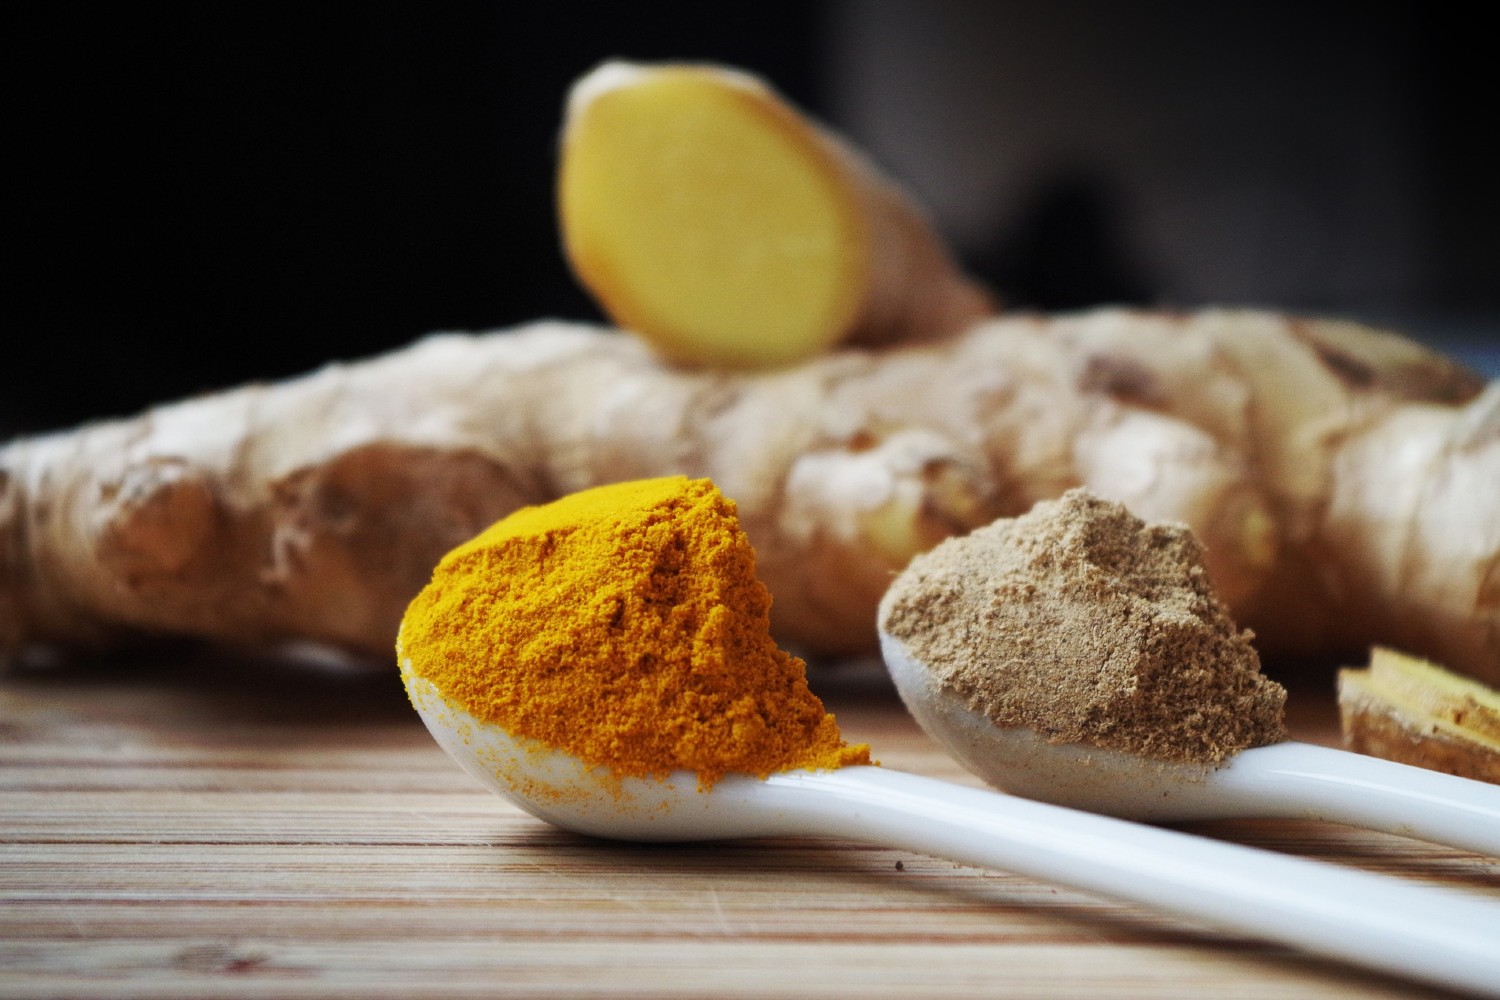 Ginger and turmeric spices